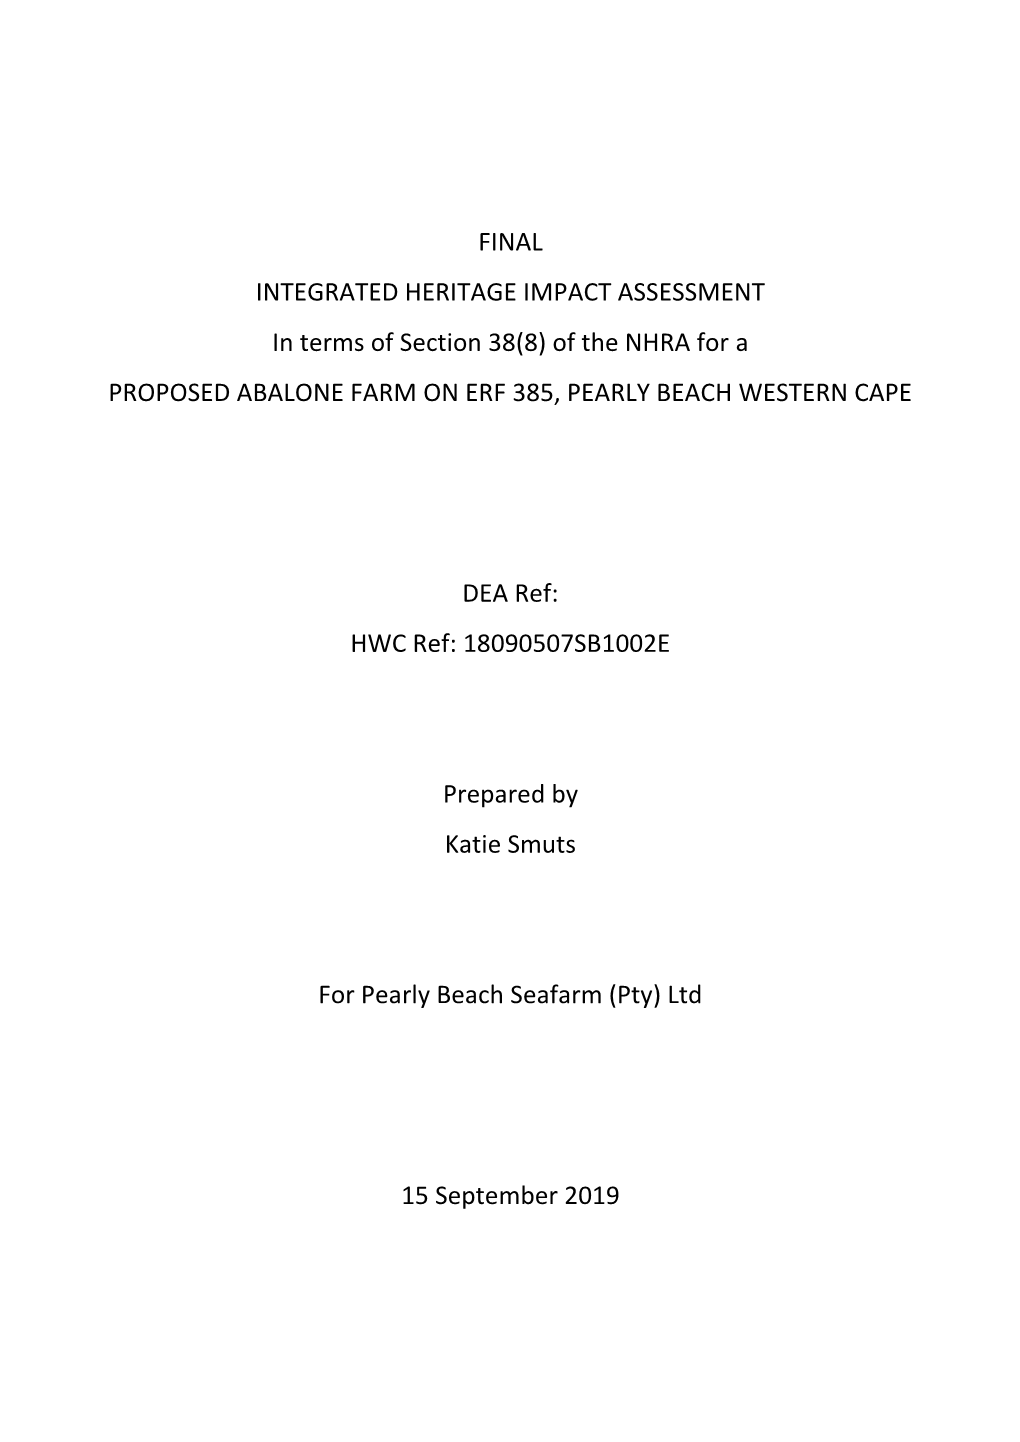 FINAL INTEGRATED HERITAGE IMPACT ASSESSMENT in Terms of Section 38(8) of the NHRA for a PROPOSED ABALONE FARM on ERF 385, PEARLY BEACH WESTERN CAPE